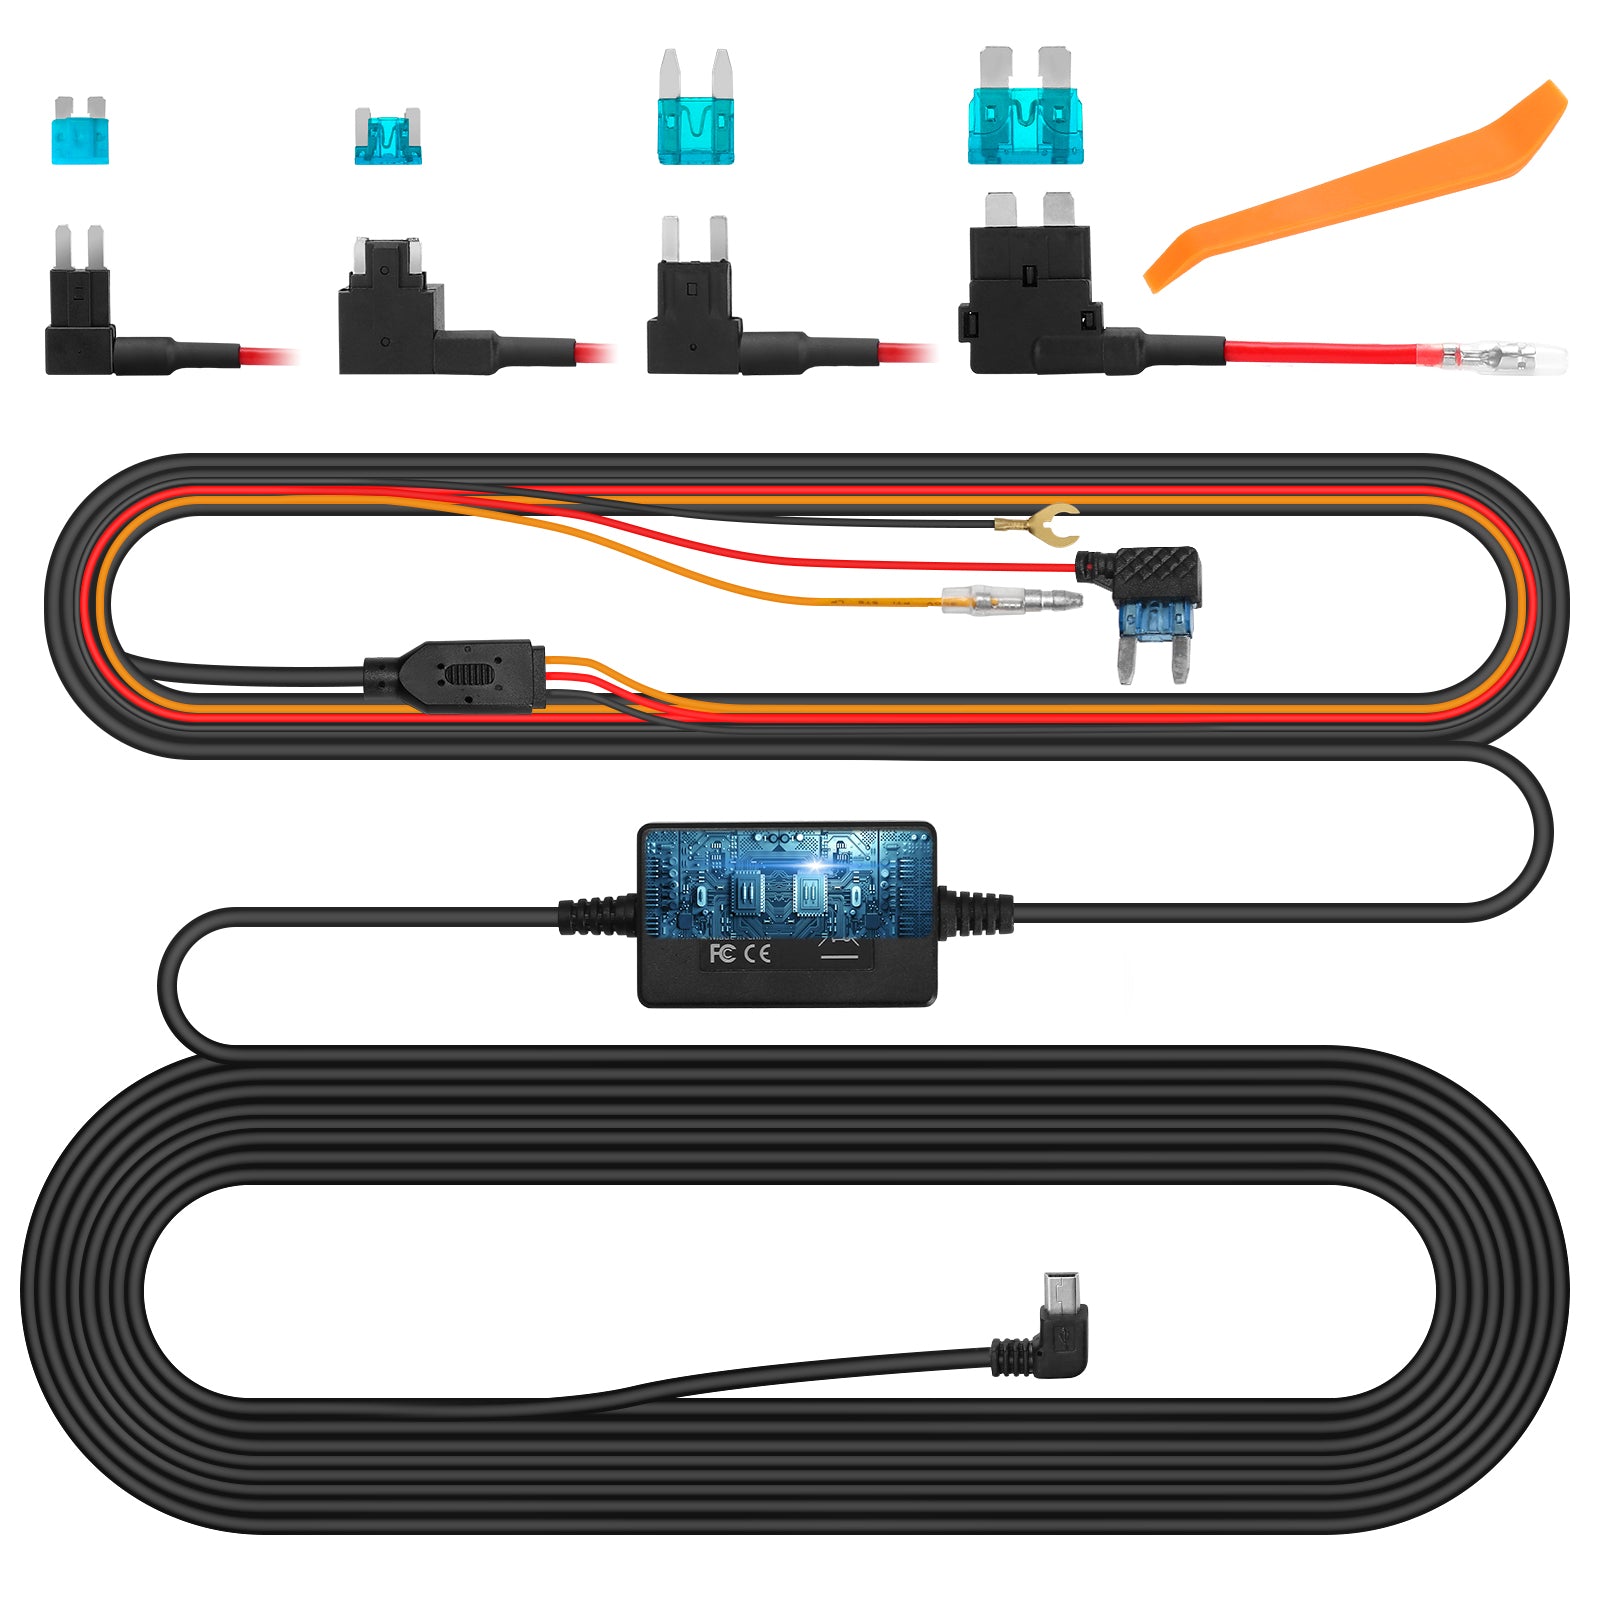 Dash Cam Hardwire Kit with 4 x Fuse Taps, 4 x Blade Fuses and 1 x Pry Tool.